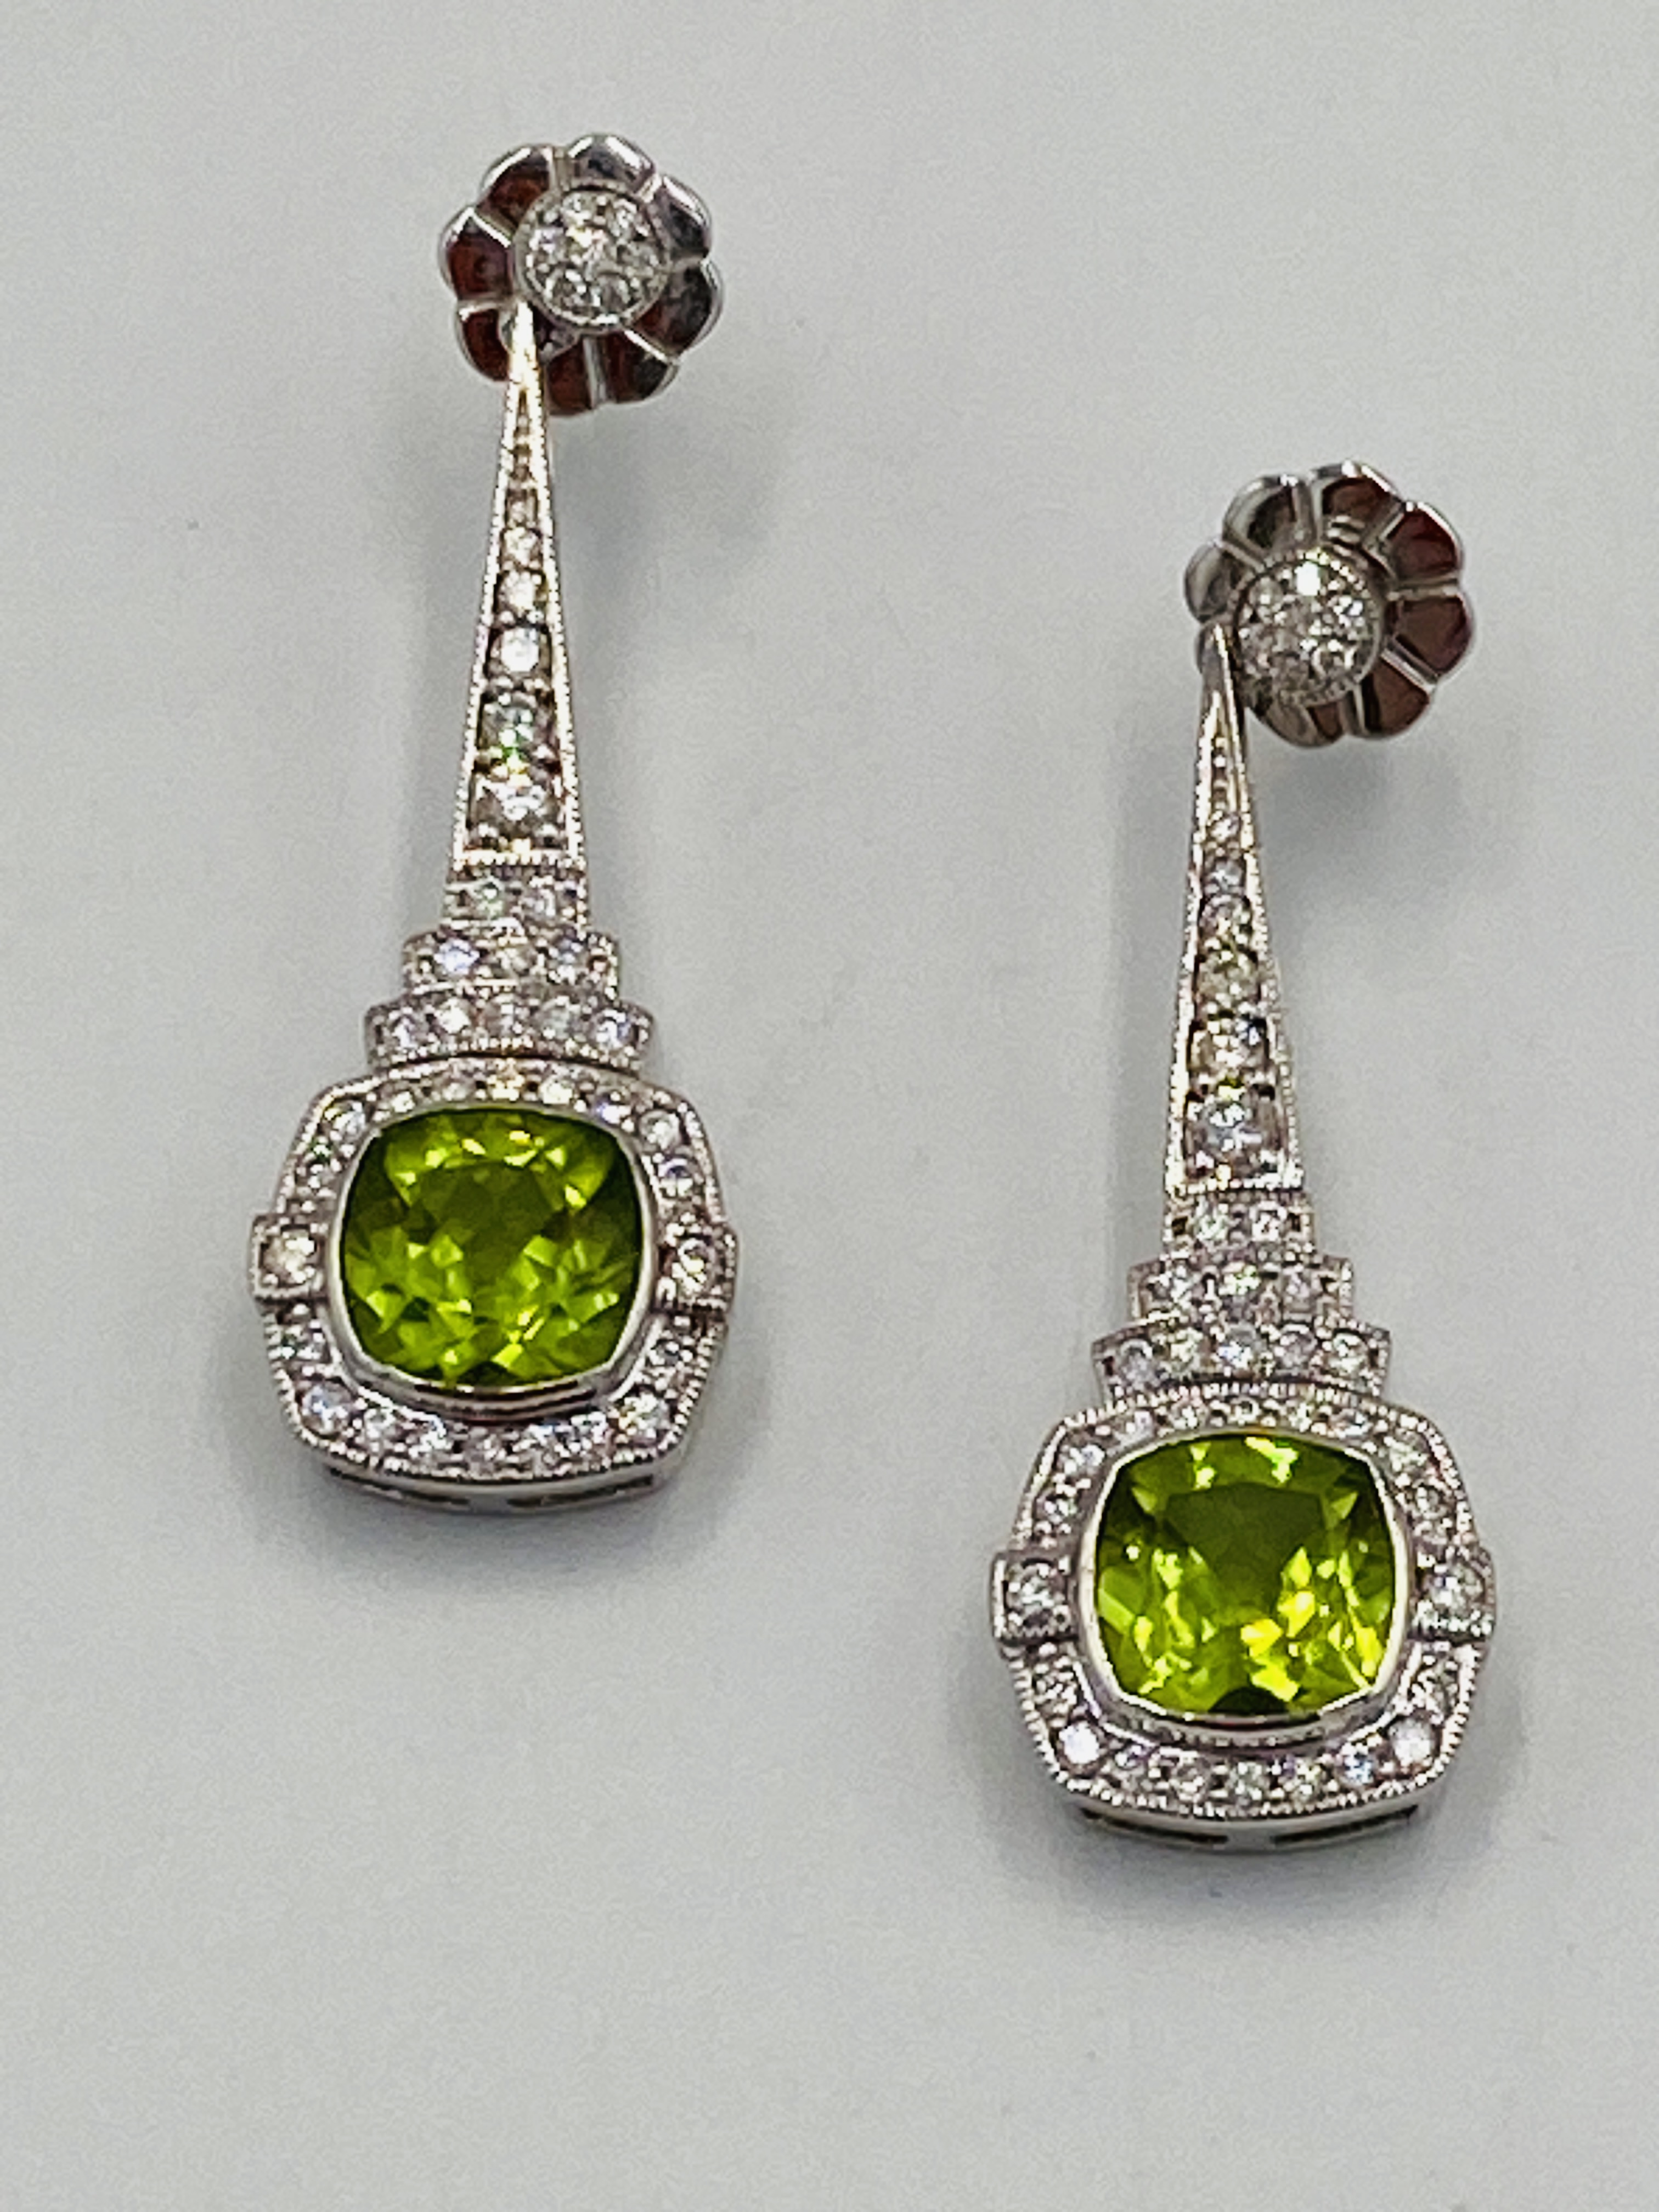 18ct white gold, diamond and green stone drop earrings - Image 7 of 8